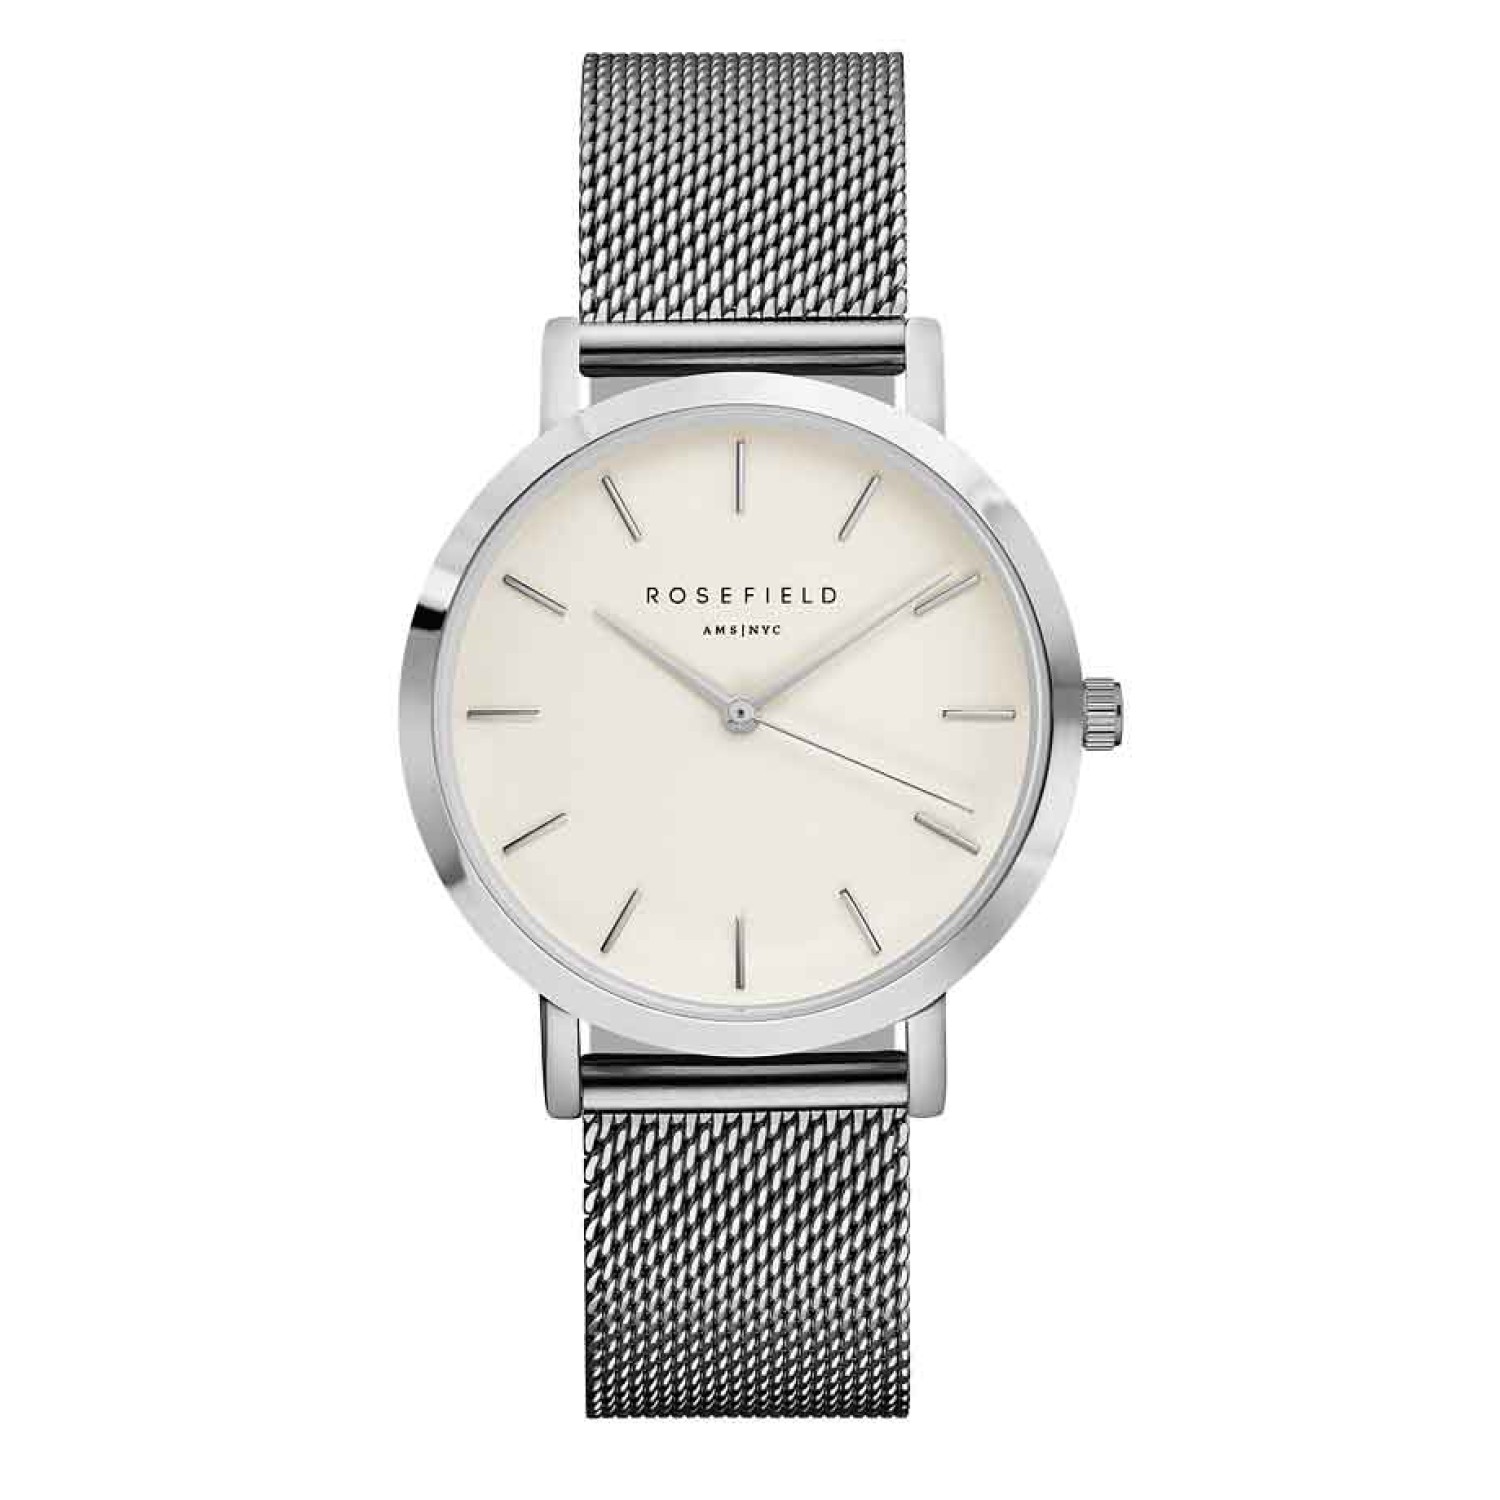 MWS-M40 Rosefield Silver The Mercer Mesh Watch. The Mercer: Paying tribute to an exciting street in one of NYC’s signature shopping destinations, the MERCER collection features stainless steel mesh straps for an exquisite look that suits this fashionable 